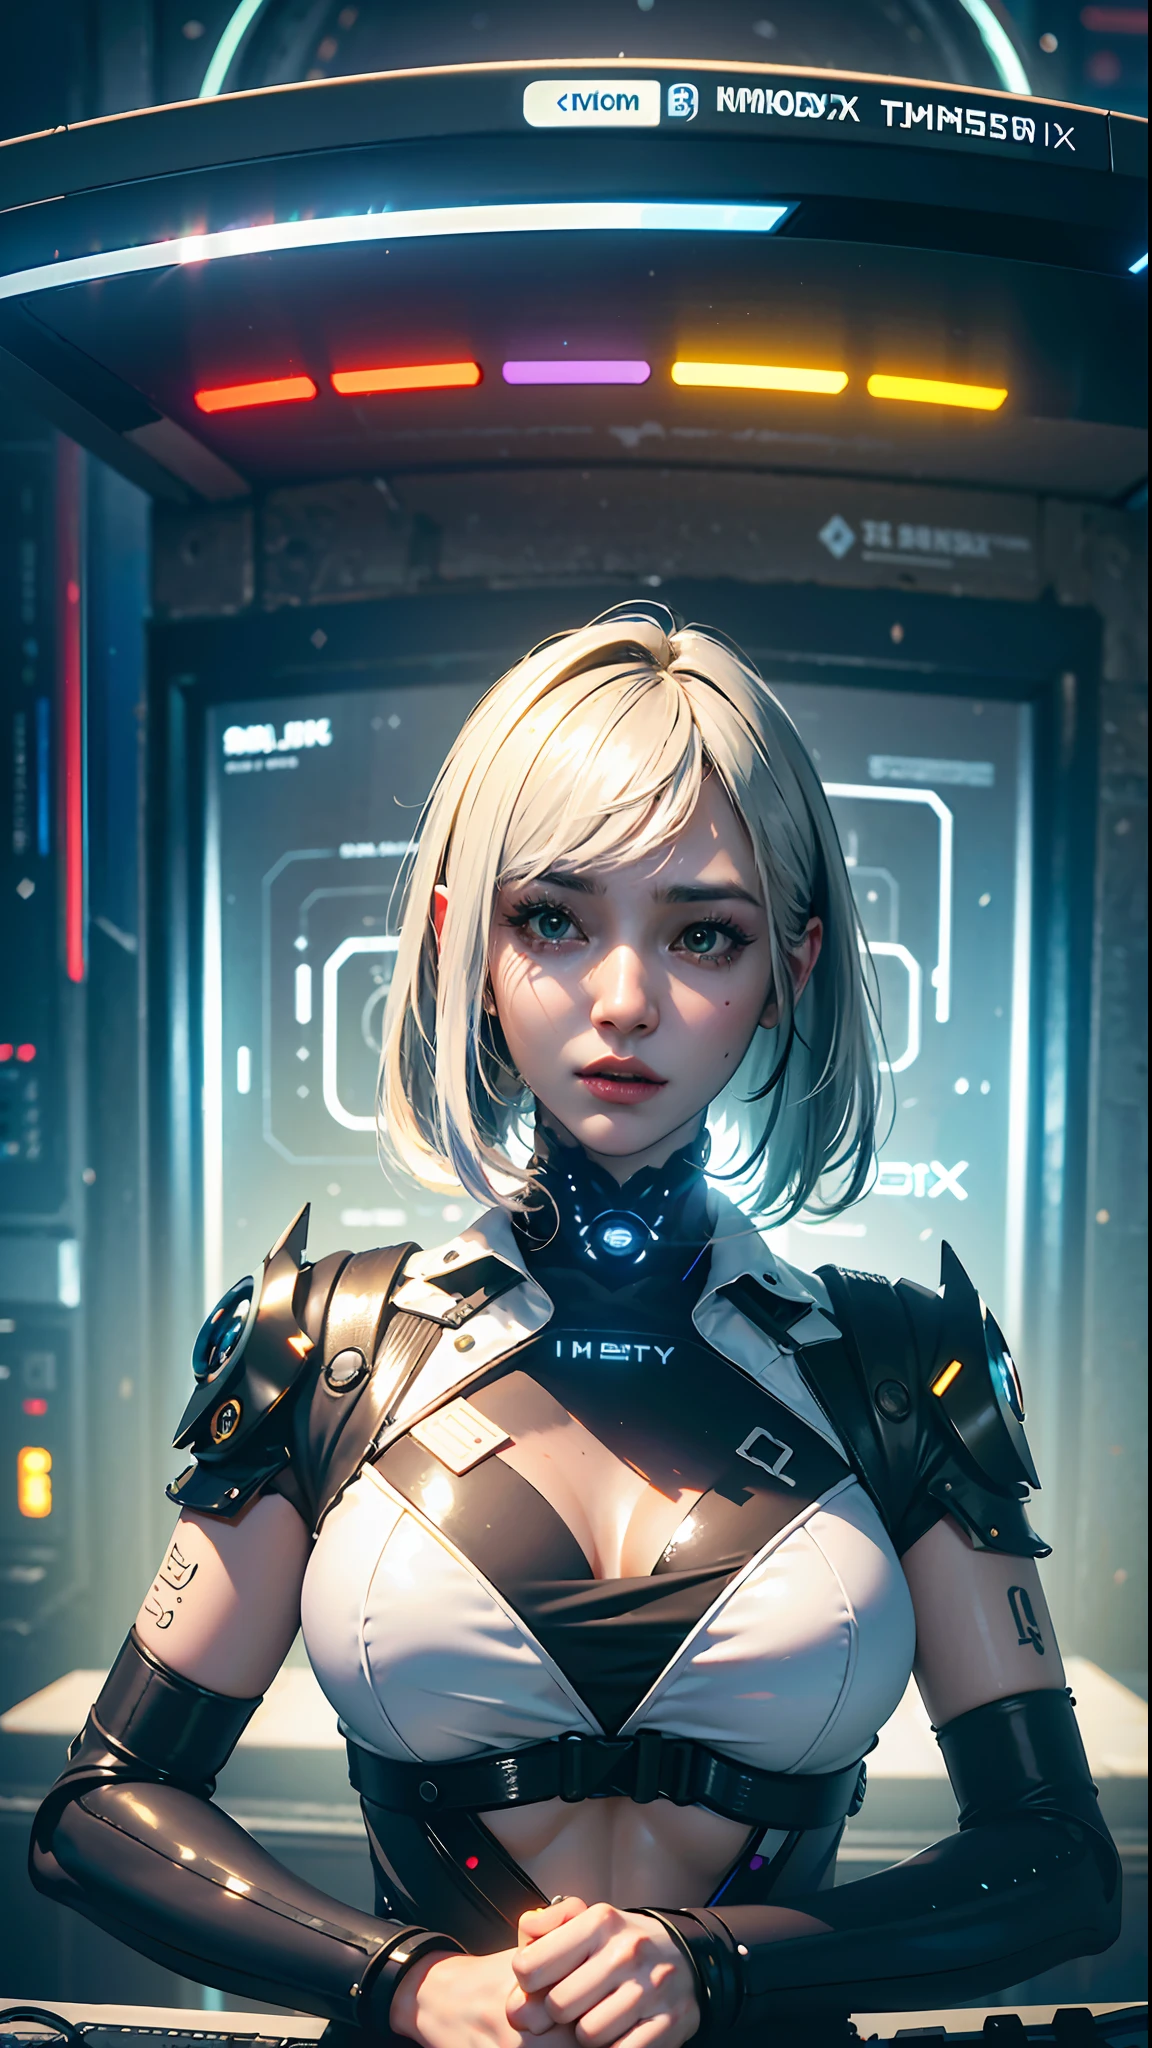 ((Best quality)), ((masterpiece)), (highly detailed:1.3), 3D, beautiful (cyberpunk:1.3) female hacker with thick voluminous hair operating a computer terminal, computer servers, LCD screens, fibre optic cables, corporate logos,HDR (High Dynamic Range),Ray Tracing,NVIDIA RTX,Super-Resolution,Unreal 5,Subsurface scattering,PBR Texturing,Post-processing,Anisotropic Filtering,Depth-of-field,Maximum clarity and sharpness,Multi-layered textures,Albedo and Specular maps,Surface shading,Accurate simulation of light-material interaction,Perfect proportions,Octane Render,Two-tone lighting,Low ISO,White balance,Rule of thirds,Wide aperature,8K RAW,Efficient Sub-Pixel,sub-pixel convolution,luminescent particles,